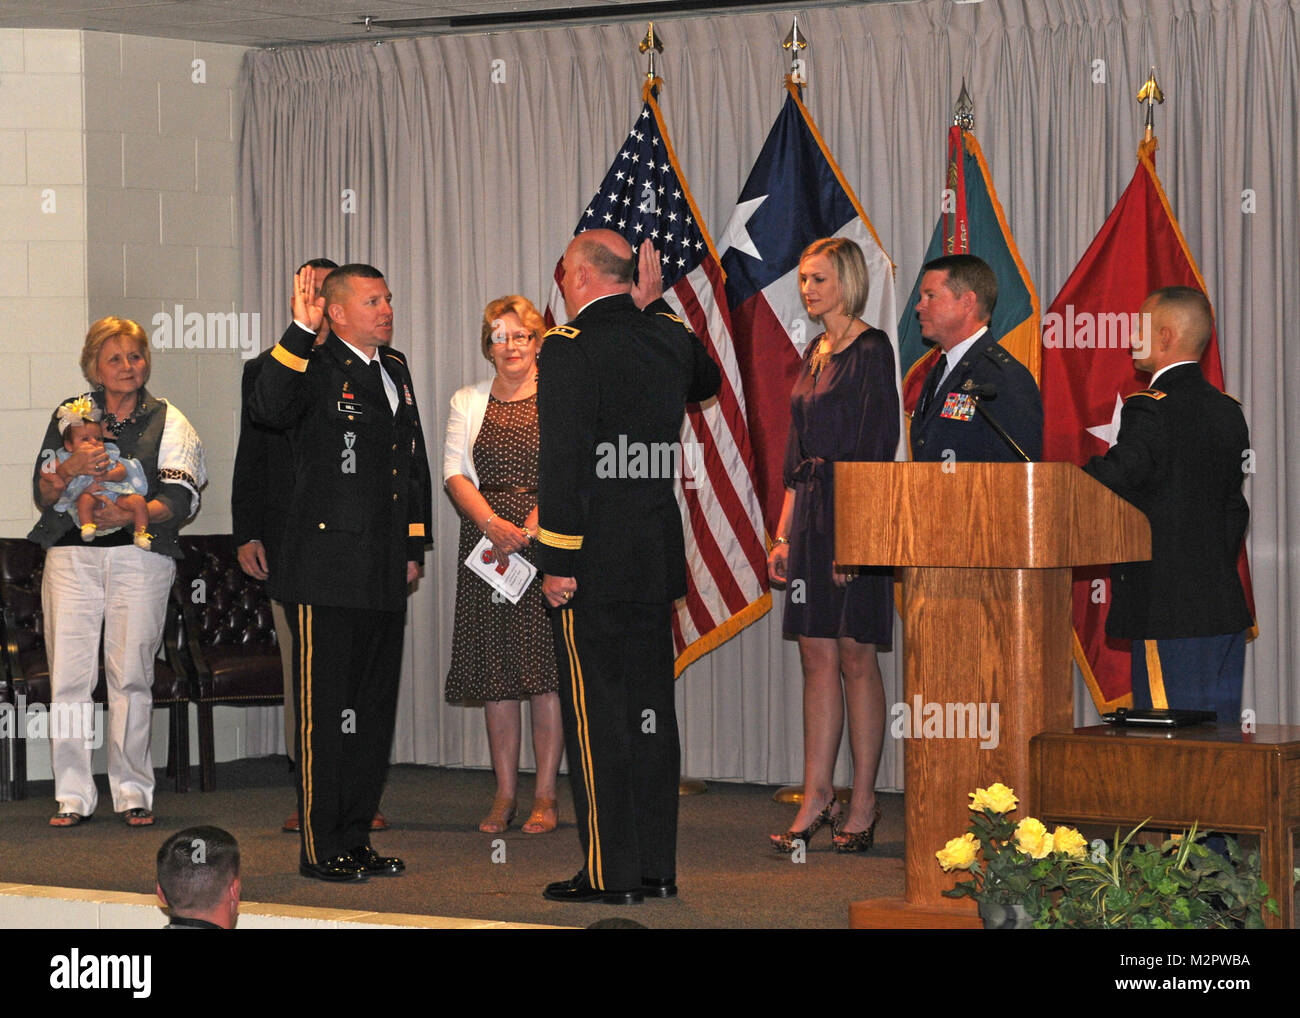 William A. Hall of Round Rock, Texas, is promoted to rank of Brigadier General in the Texas Army National Guard, and is surrounding by family while he is adminstered the oath of office by Maj. Gen. James K. 'Red' Brown, commanding general of the Texas Army National Guard's 36th Infantry Division, during a ceremony at Camp Mabry, in Austin, Texas, on June 9, 2012. Brig. Gen. Hall is the commanding general of the Texas Army National Guard's 136th Maneuver Enhancement Brigade (MEB), based in Round Rock, Texas. (National Guard photo by Staff Sgt. Phil Fountain / Released) BG Hall Promotion by Texa Stock Photo